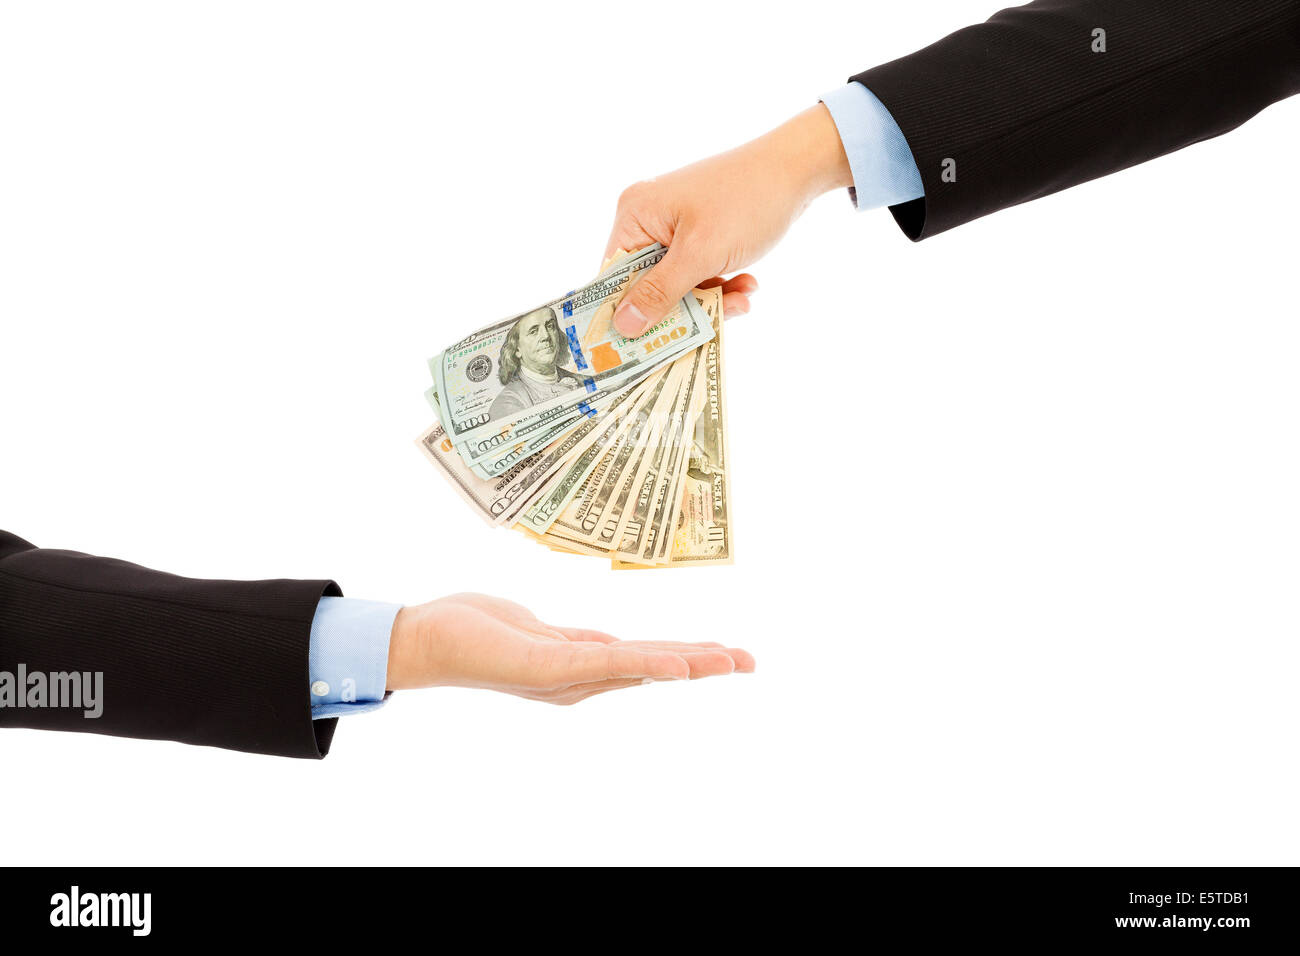 Handing Over us dollar Cash to Other Hand Isolated on a White Background. Stock Photo